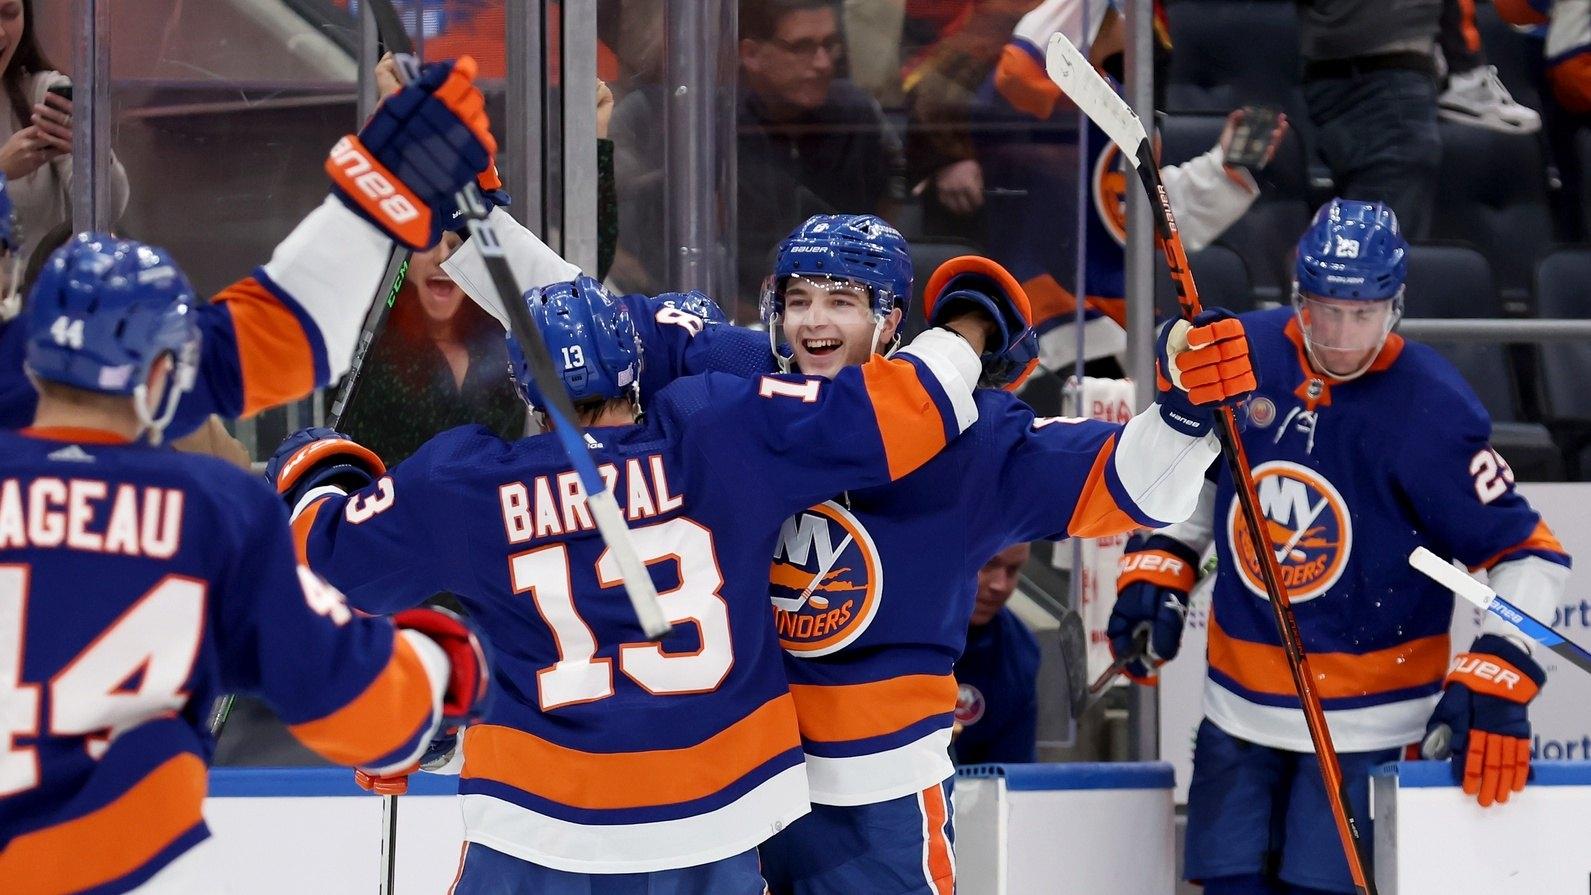 New York Islanders defenseman Noah Dobson (8) celebrates with teammates after scoring the game winning overtime goal against the Calgary Flames. / Brad Penner-USA TODAY Sports